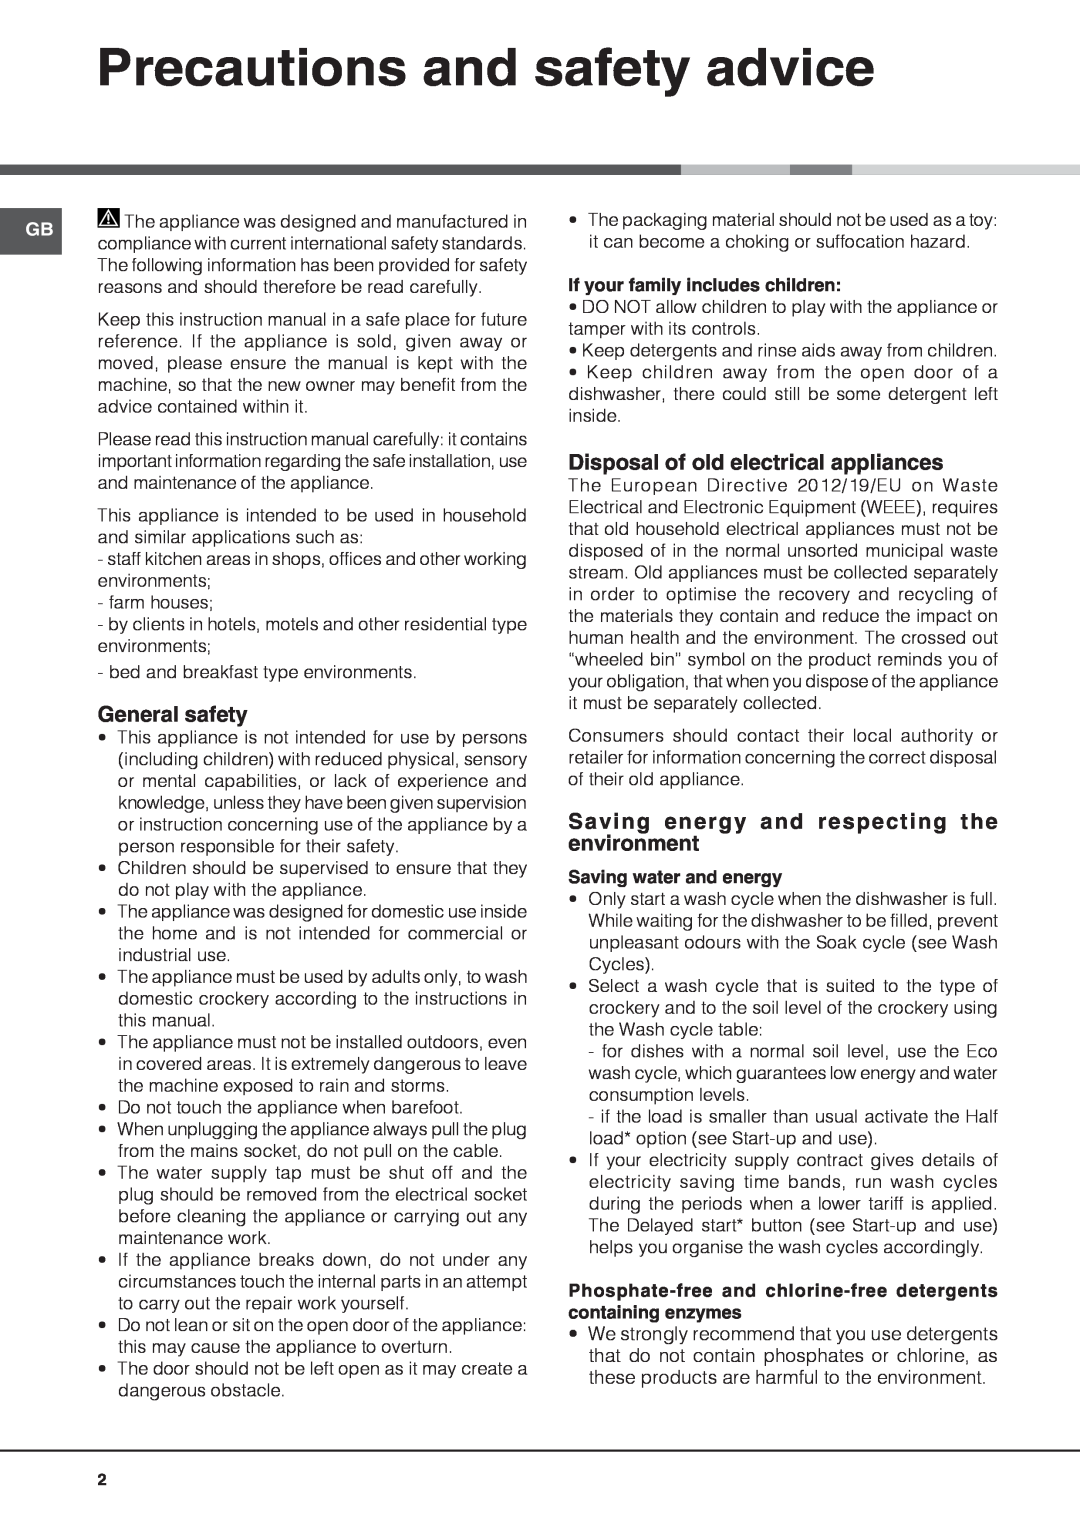 Hotpoint FDUD 44110 ULTIMA manual Precautions and safety advice, General safety, Disposal of old electrical appliances 